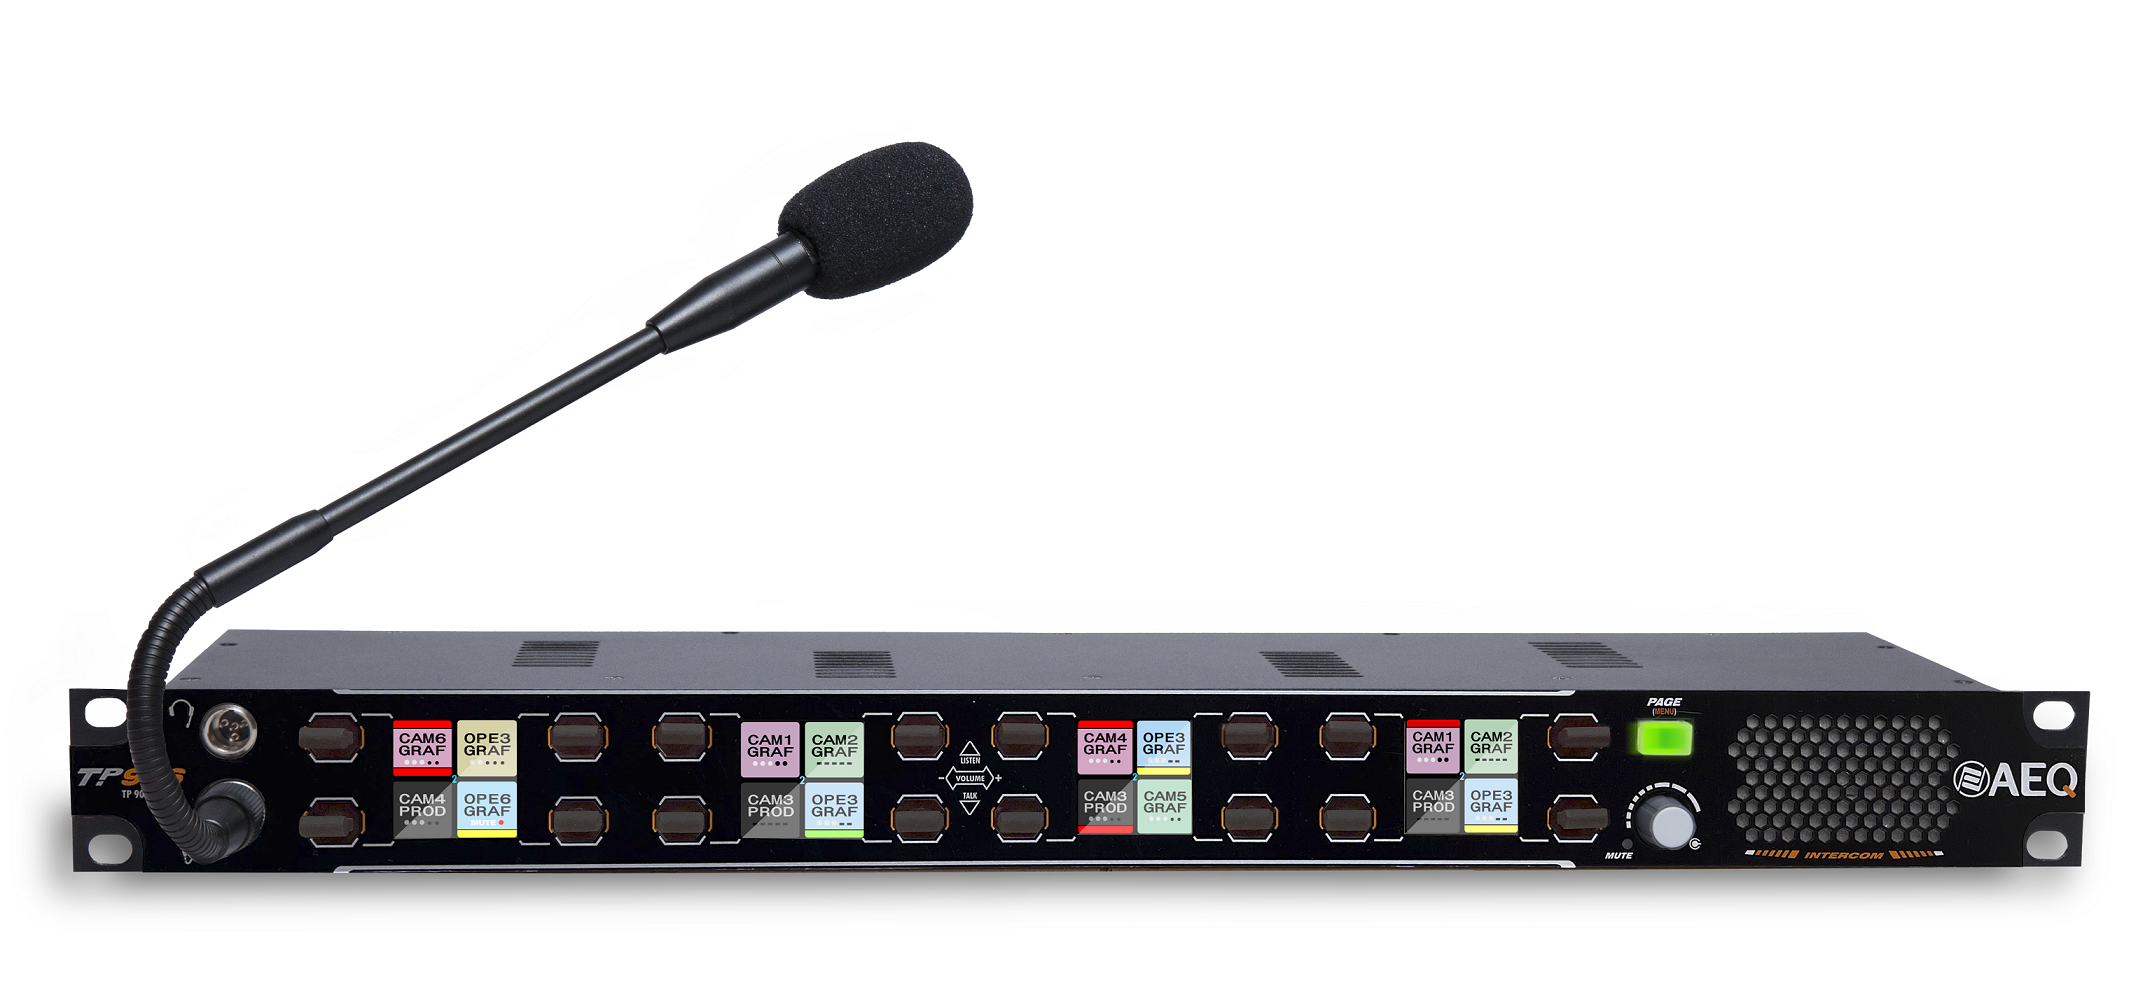 AEQ has launched new intercom updated and new IP audiocodec 